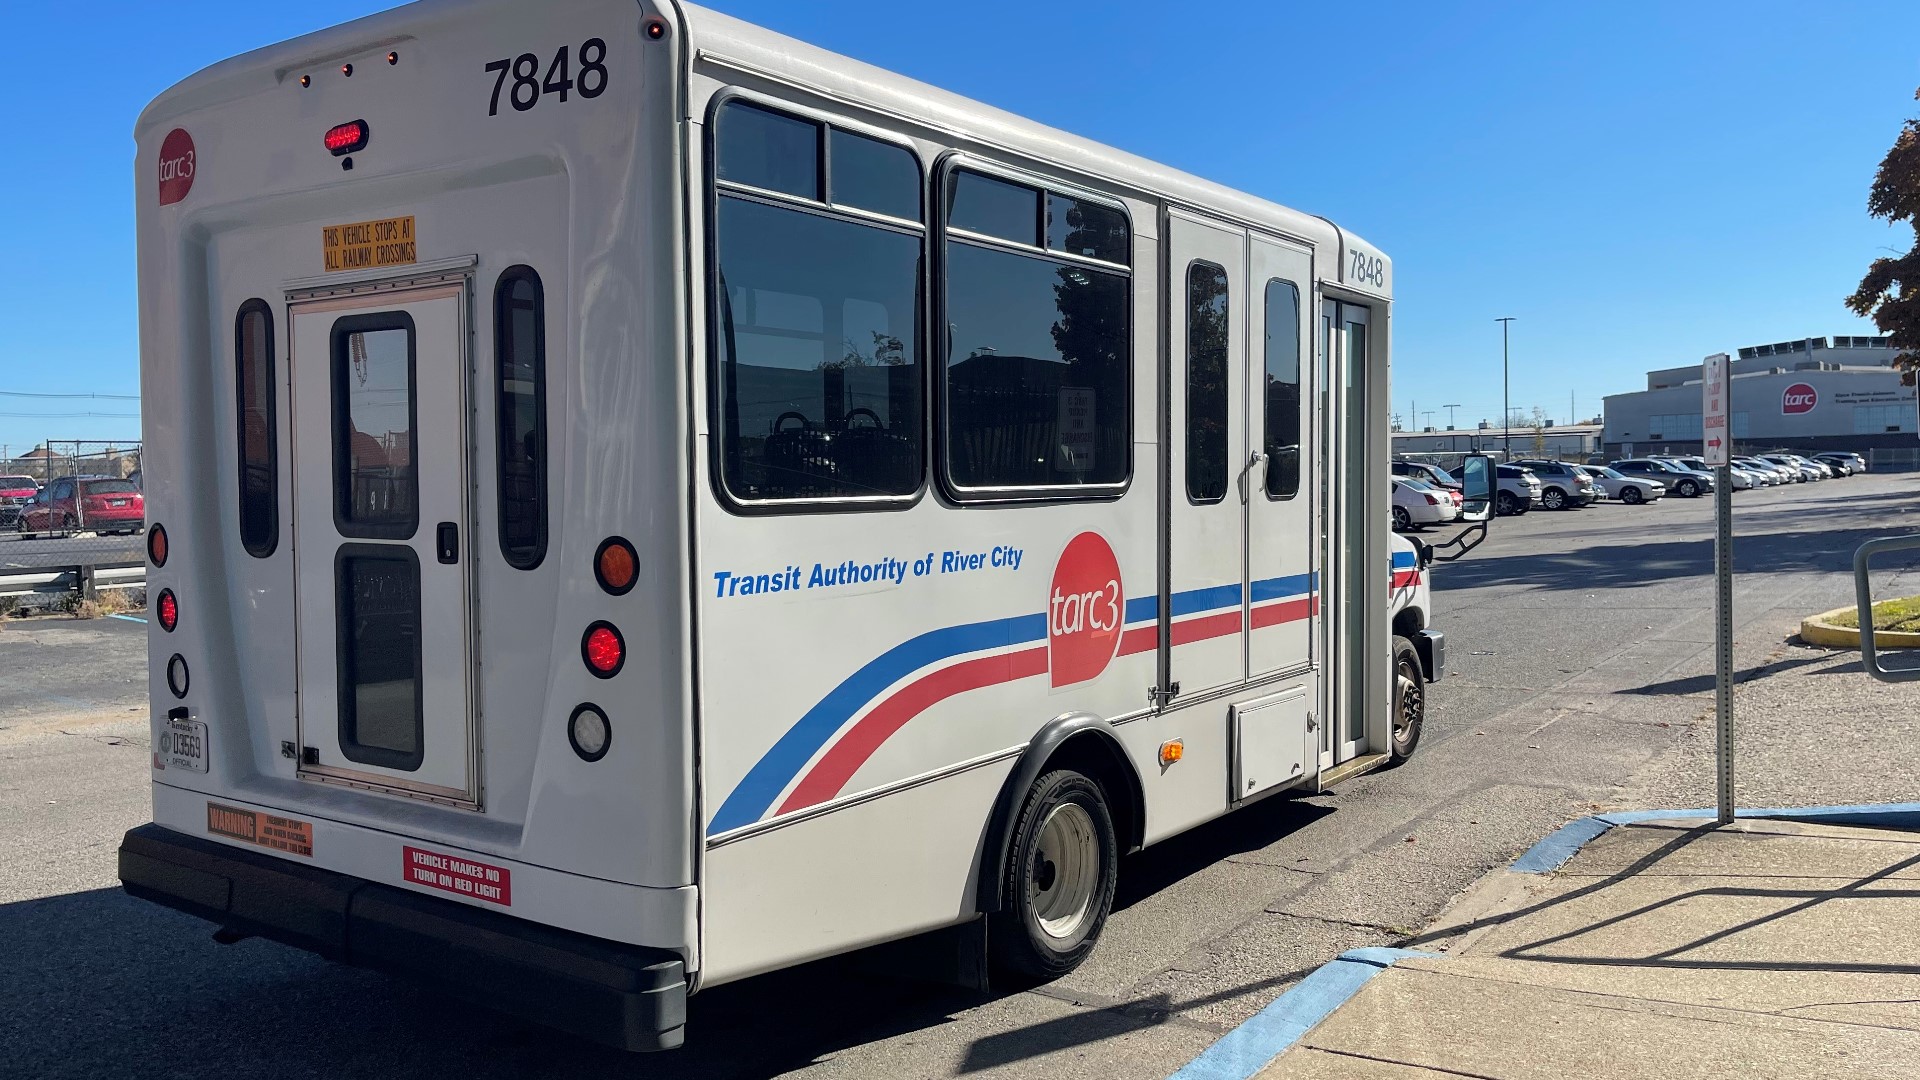 TARC3 is a shared ride service for people who have a disability preventing them from using TARC's daily bus service.